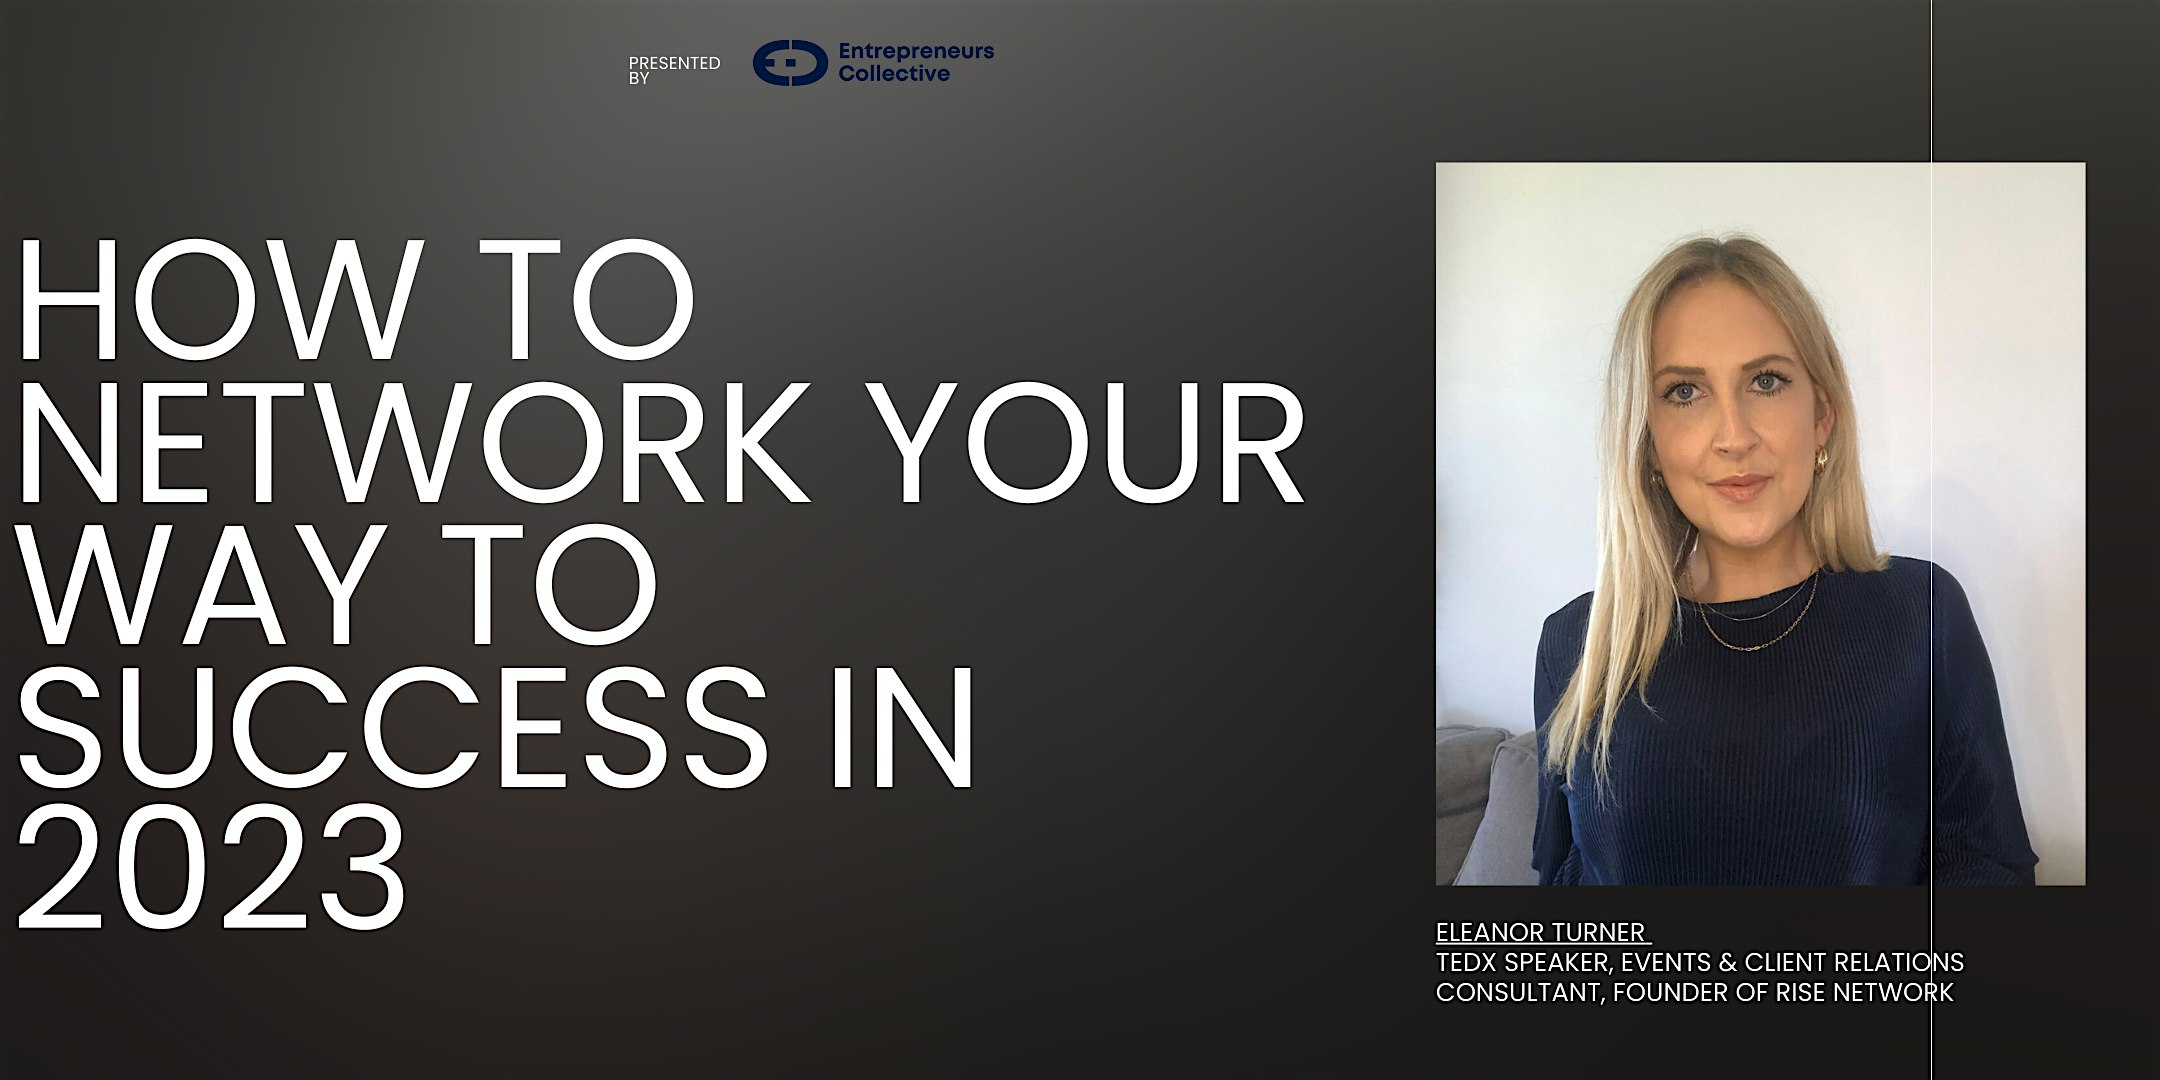 Networking Masterclass – How to Network Your Way to Success in 2023